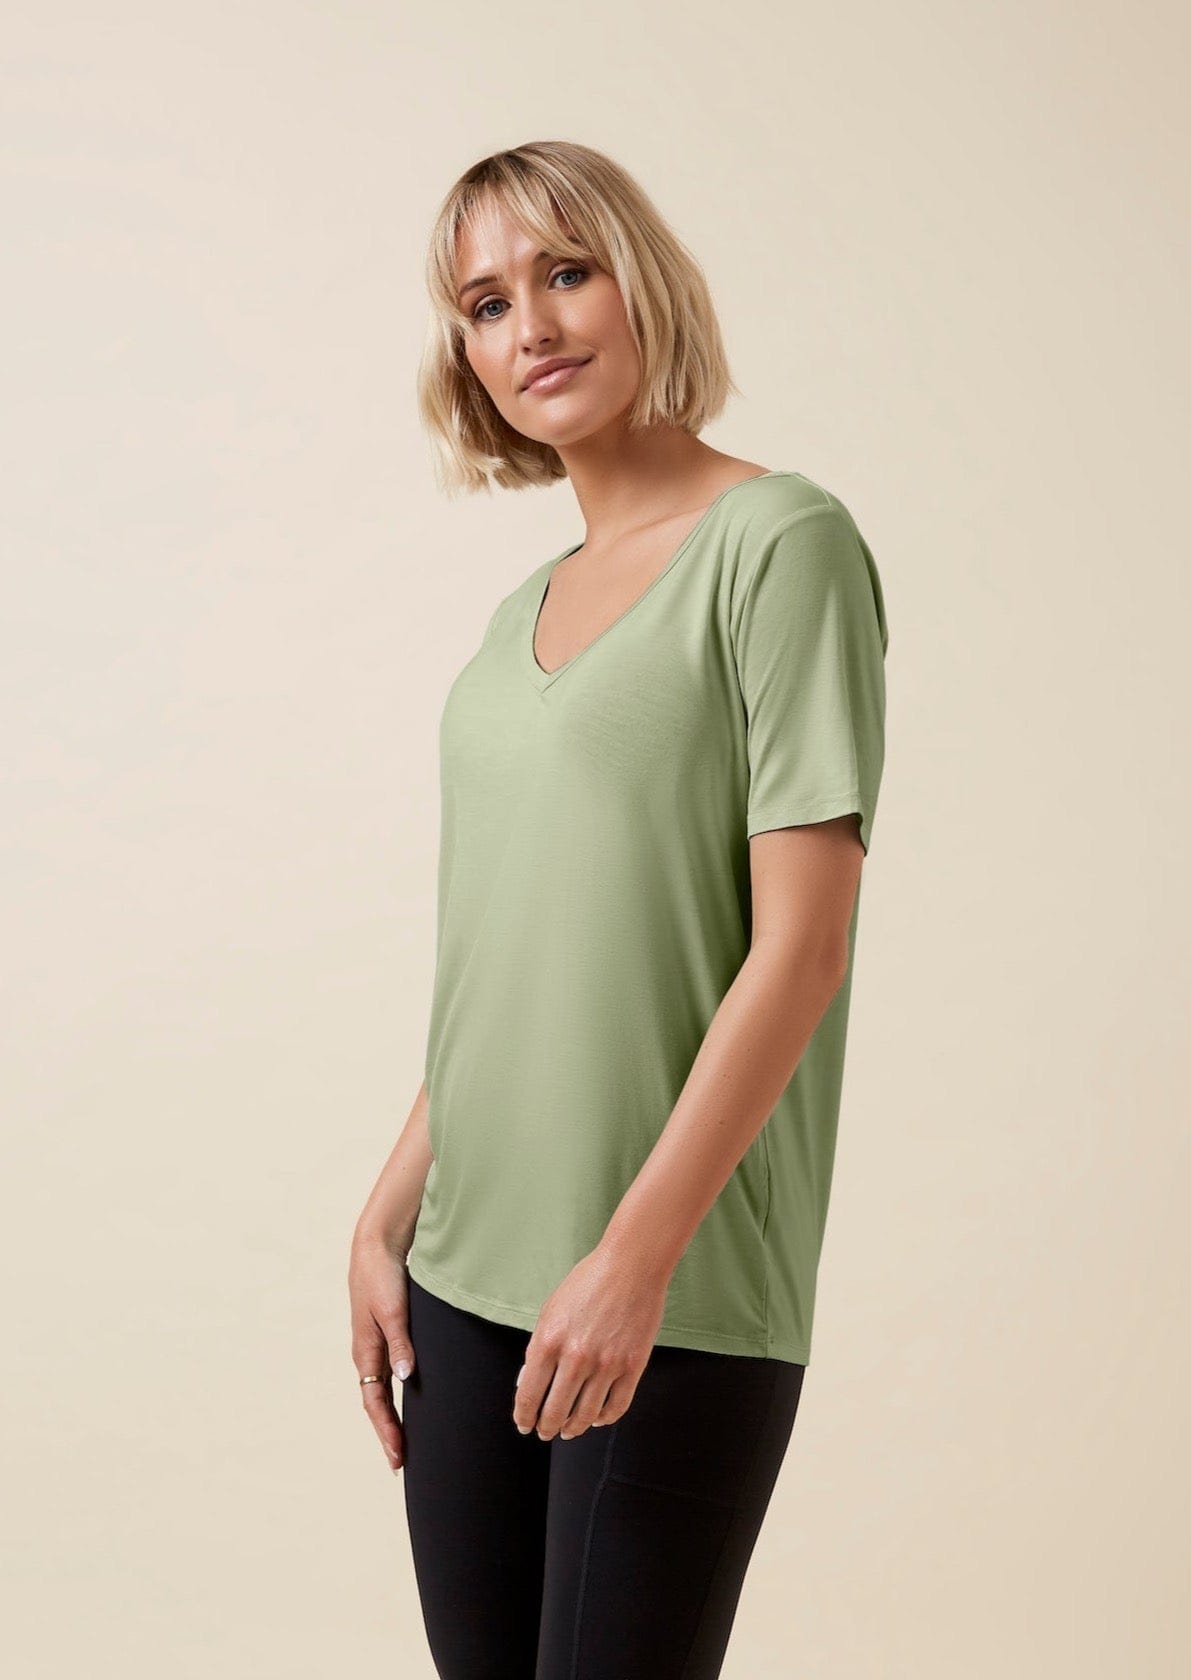 Thery Group TEE Calm Khaki The Me Slouch bamboo Tee -side view new mother no belly